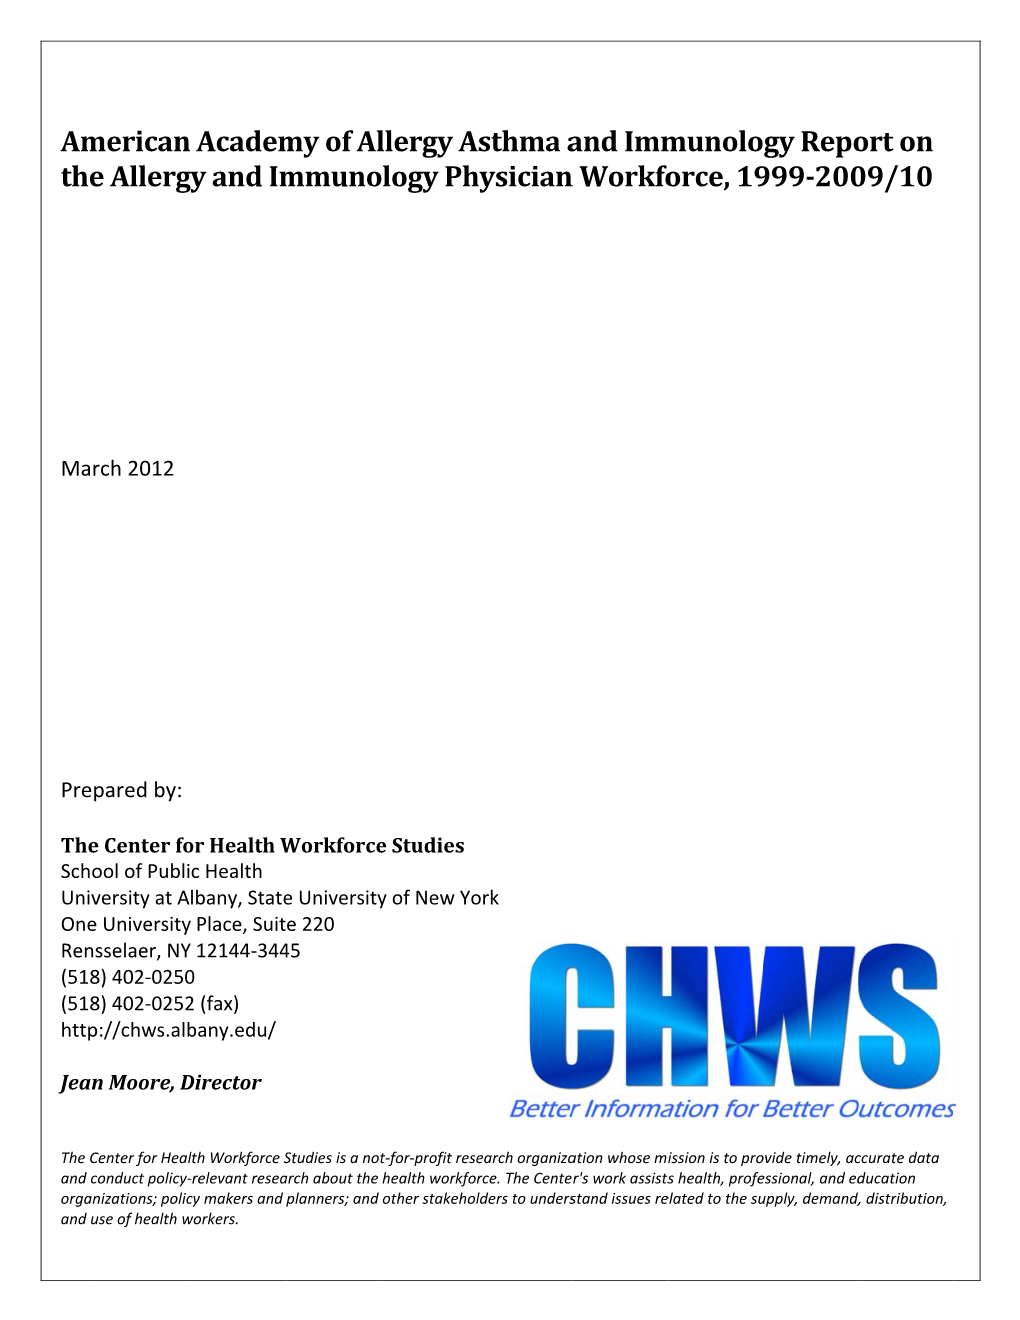 2012 AI Physician Workforce Report